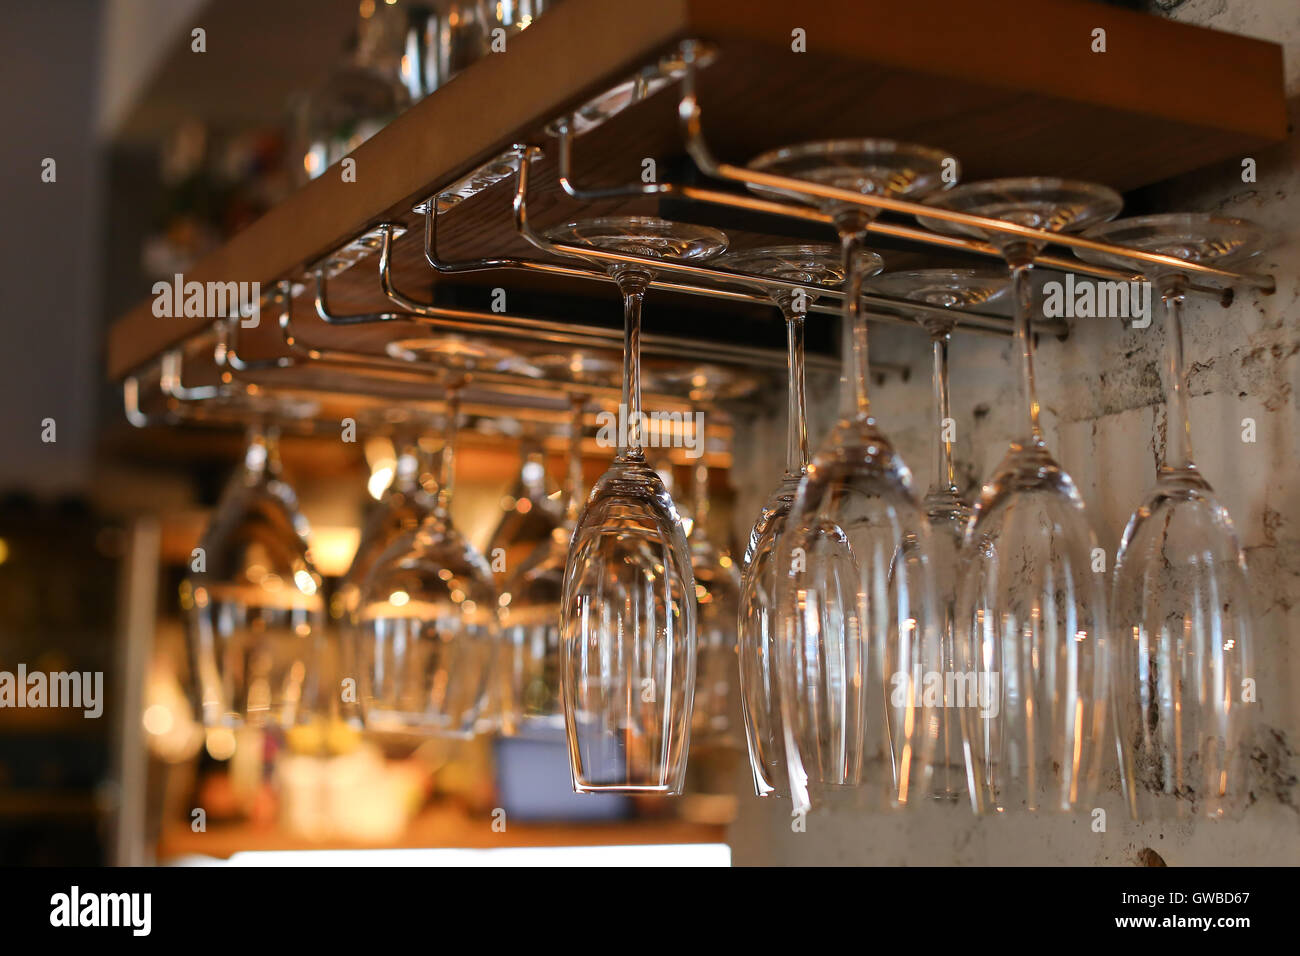 Wineglasses hanging on glass drying rack Stock Photo by seventyfourimages